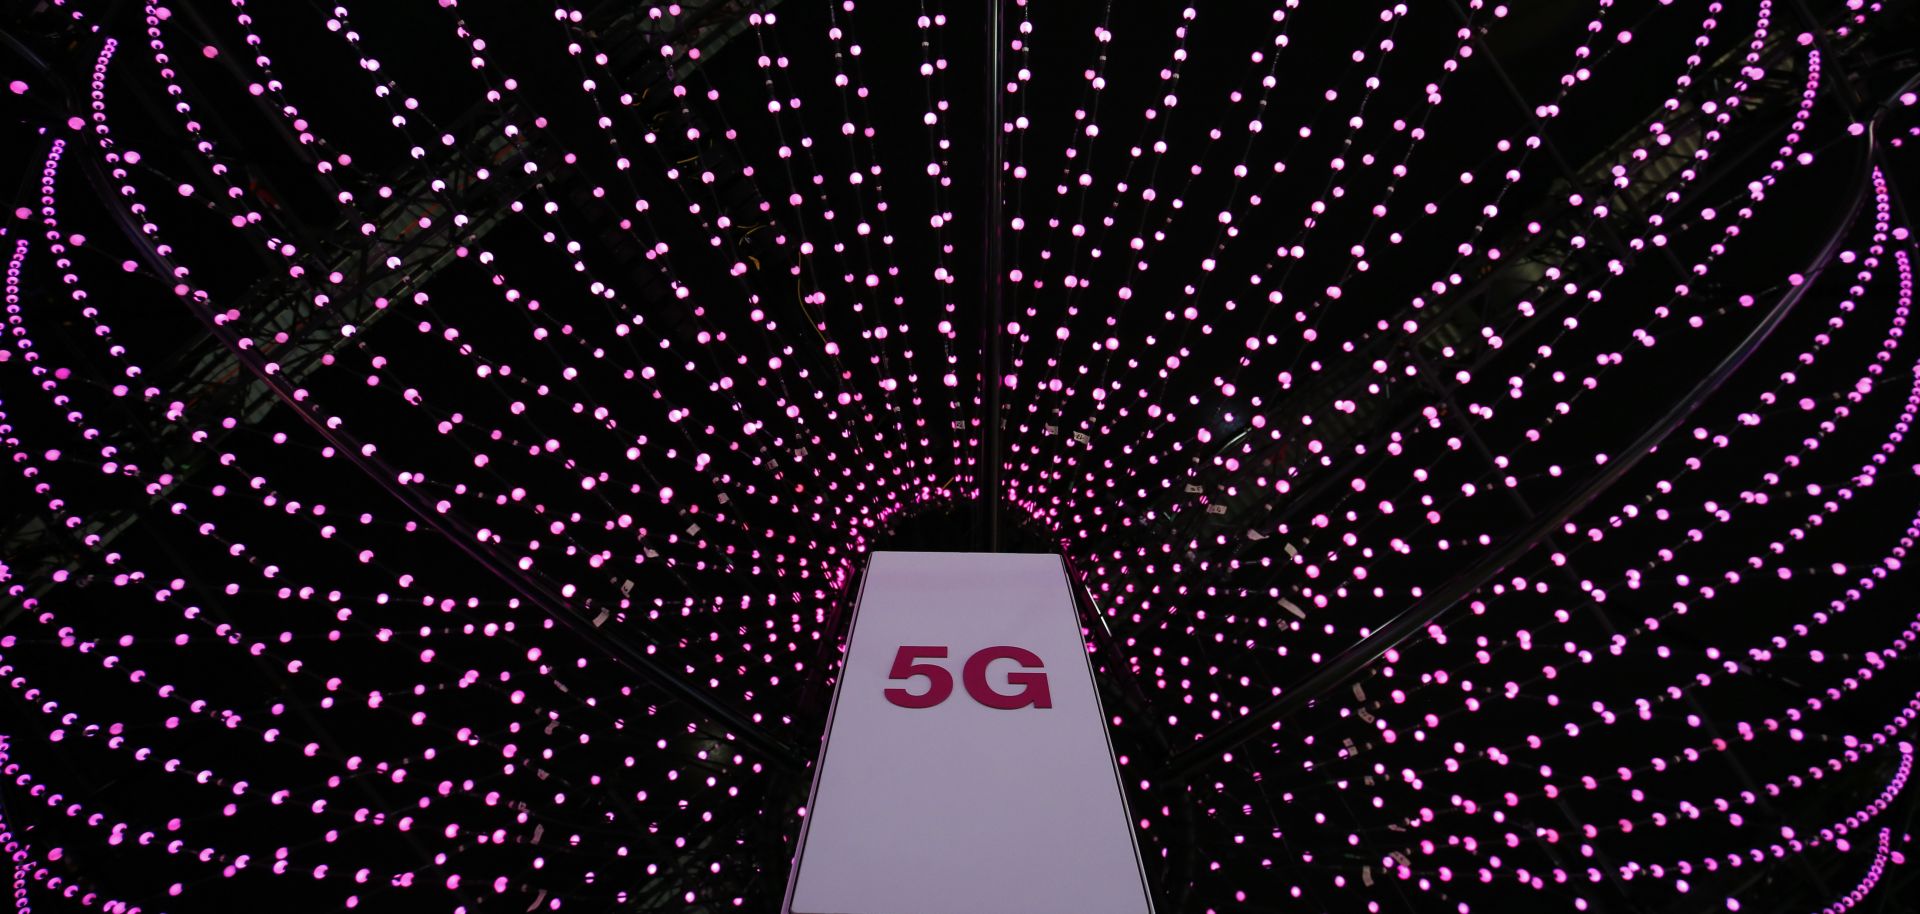 Deutsche Telekom shows off a 5G antenna at its booth at the 2018 Mobile World Congress in Barcelona.